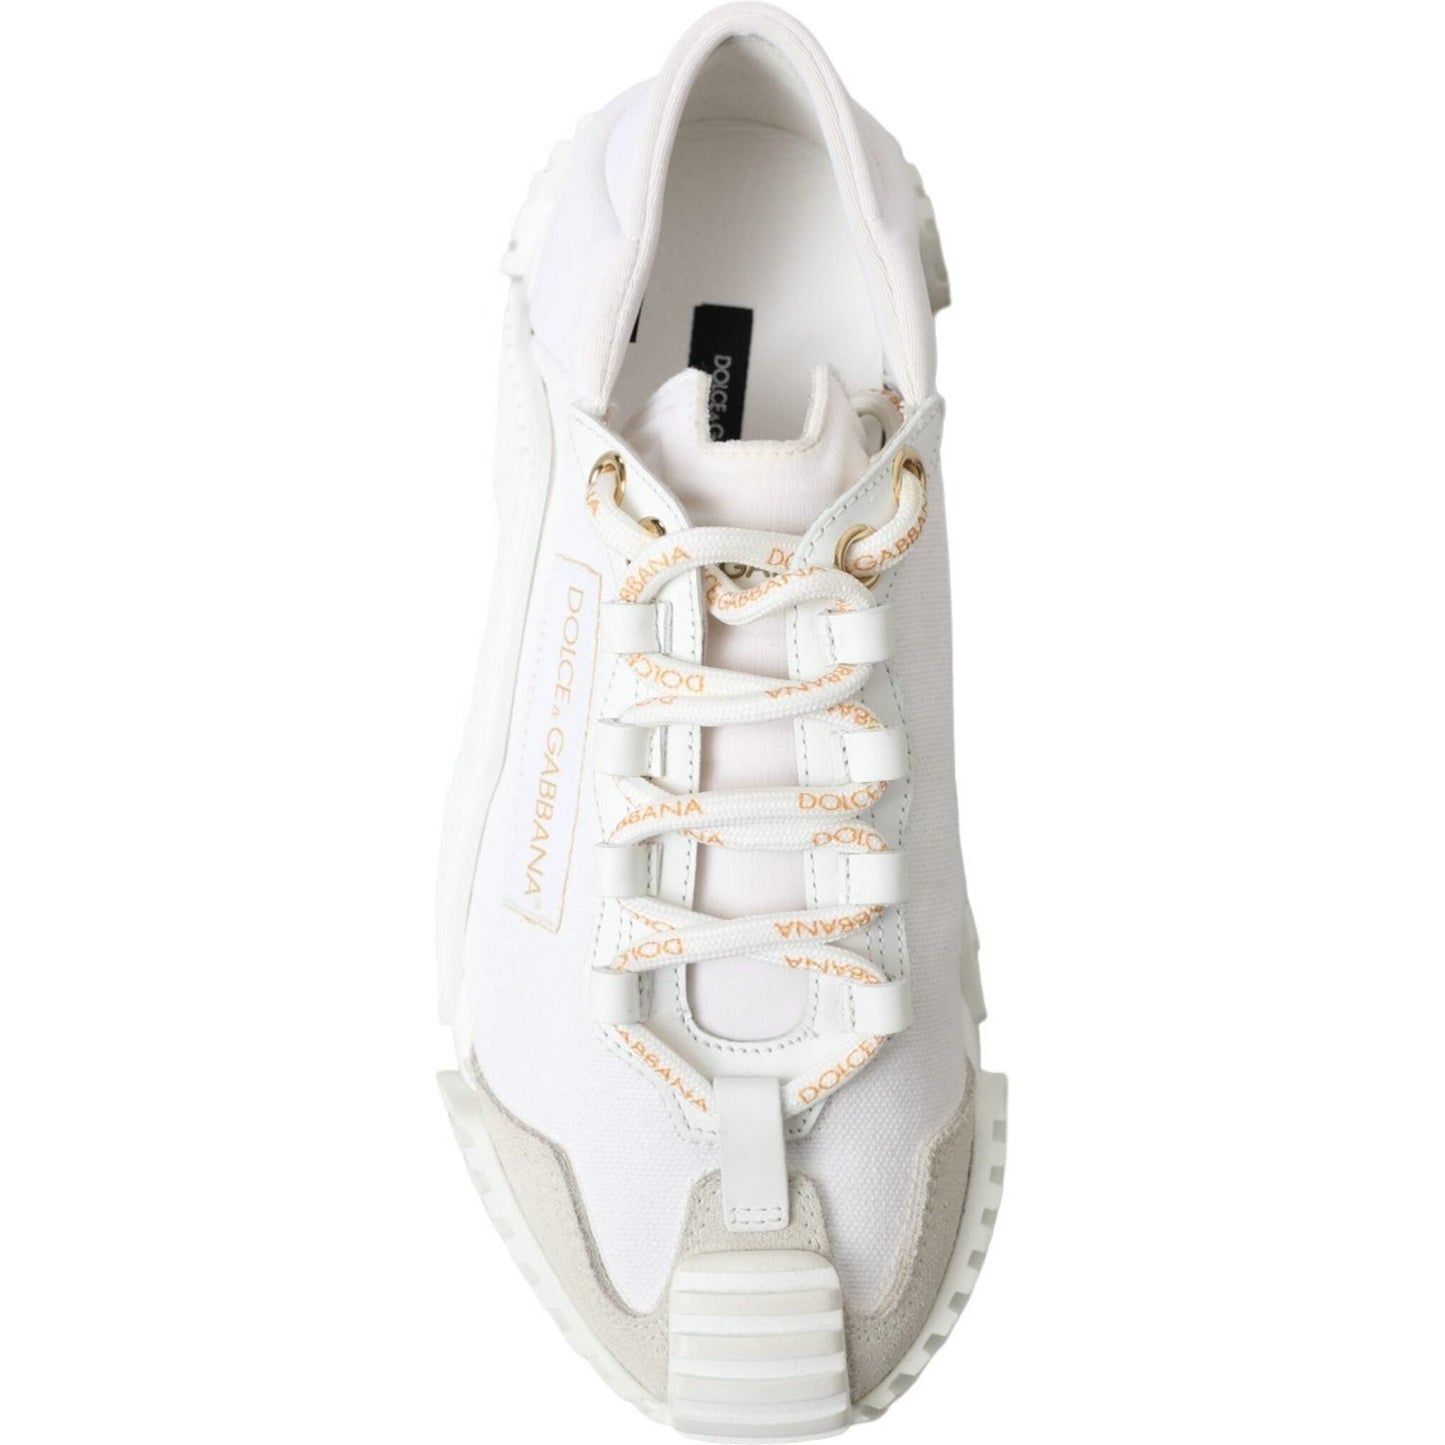 Dolce & Gabbana Elevated White NS1 Sneakers white-ns1-low-top-sports-women-sneakers-shoes 465A2477-BG-scaled-c7f0c3c8-5dd.jpg